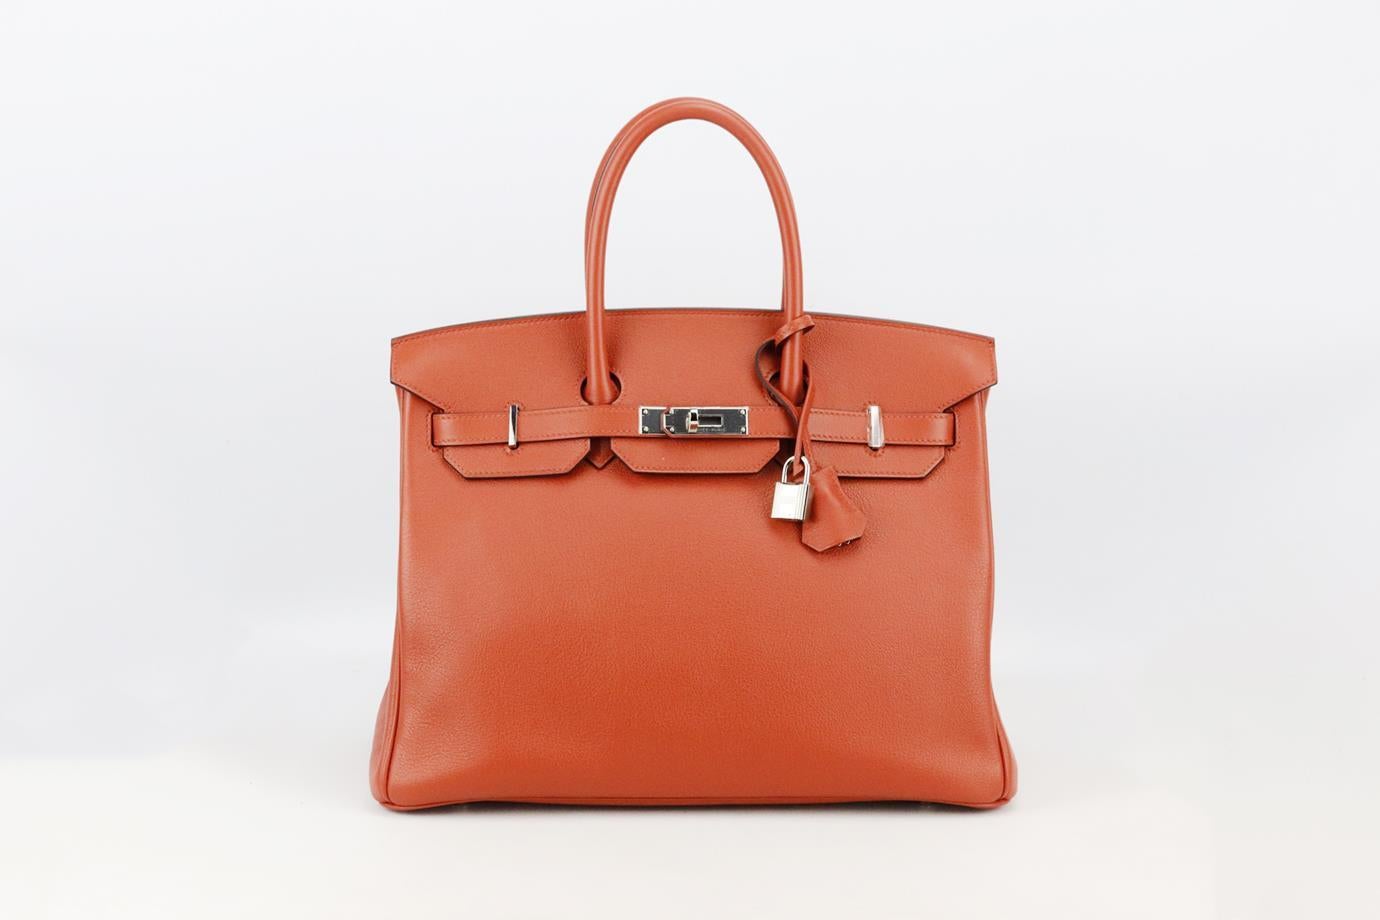 Hermès 2017 Birkin 35cm Taurillon Novillo leather bag. Made in France, this beautiful 2017 Hermès ‘Birkin’ handbag has been made from terracotta-tone ‘Taurillon Novillo’ leather exterior in ‘Cuivre’ with matching interior, this piece is decorated